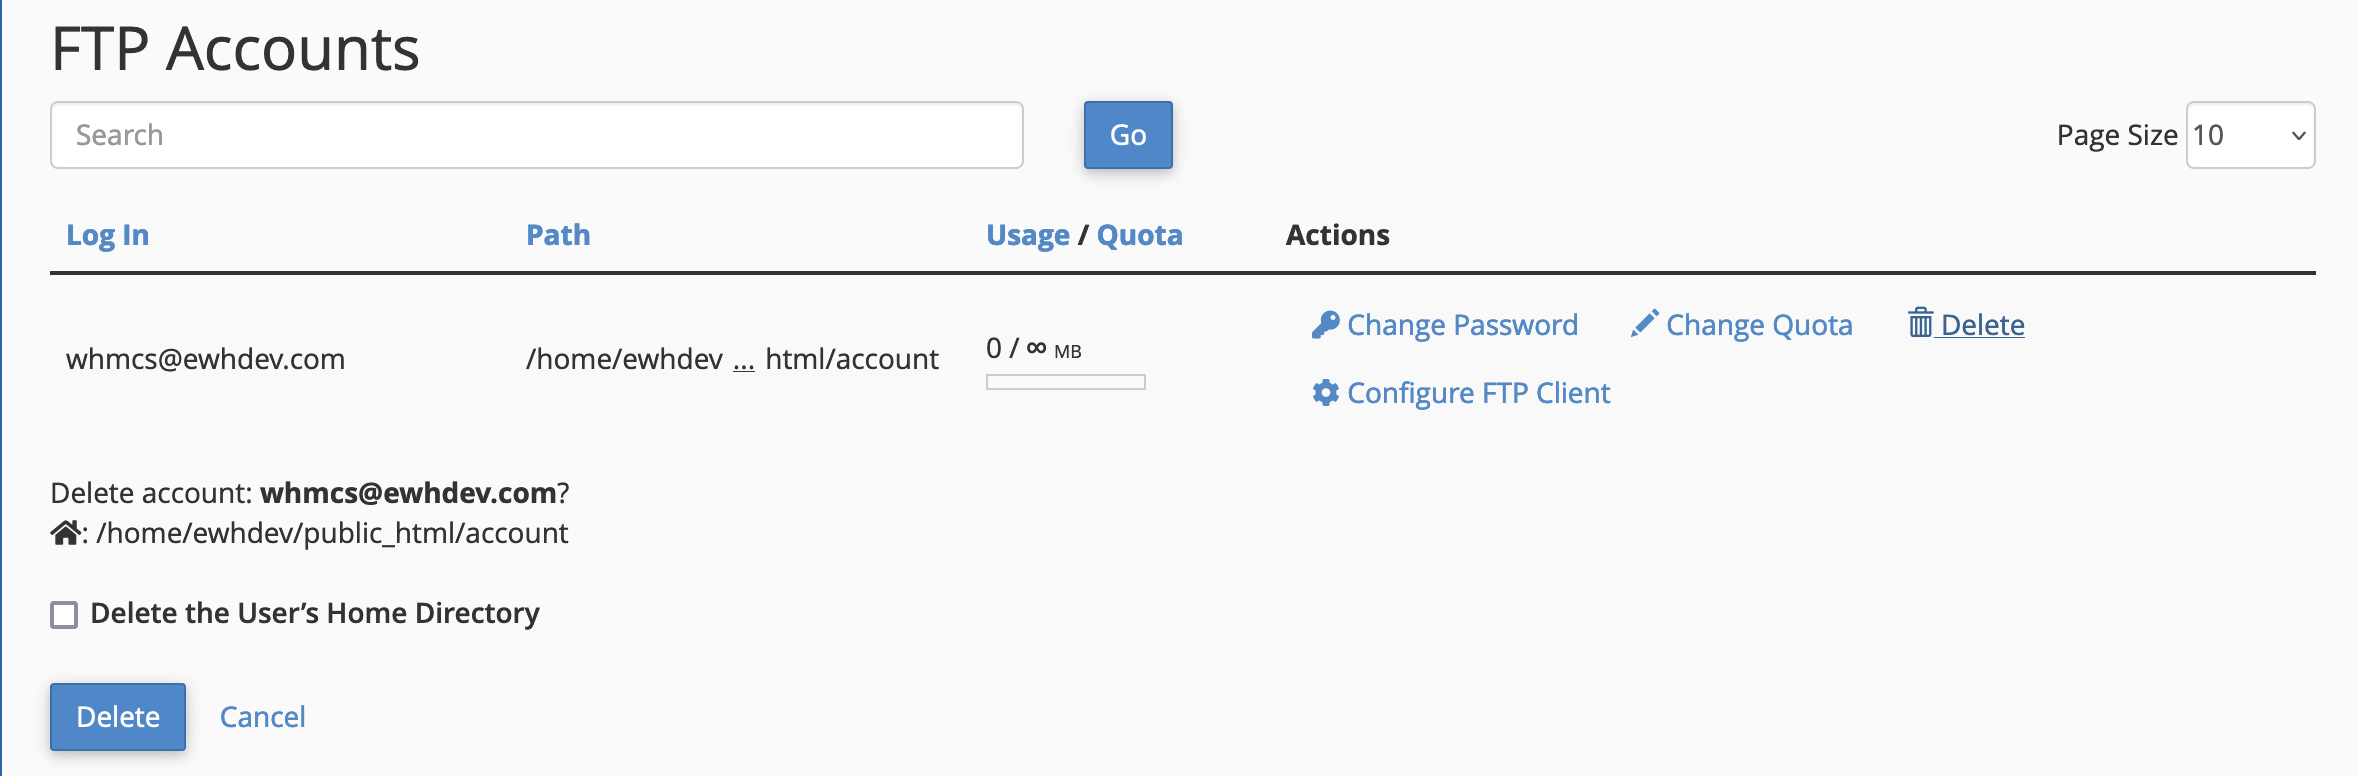 Remove an FTP Account in cPanel